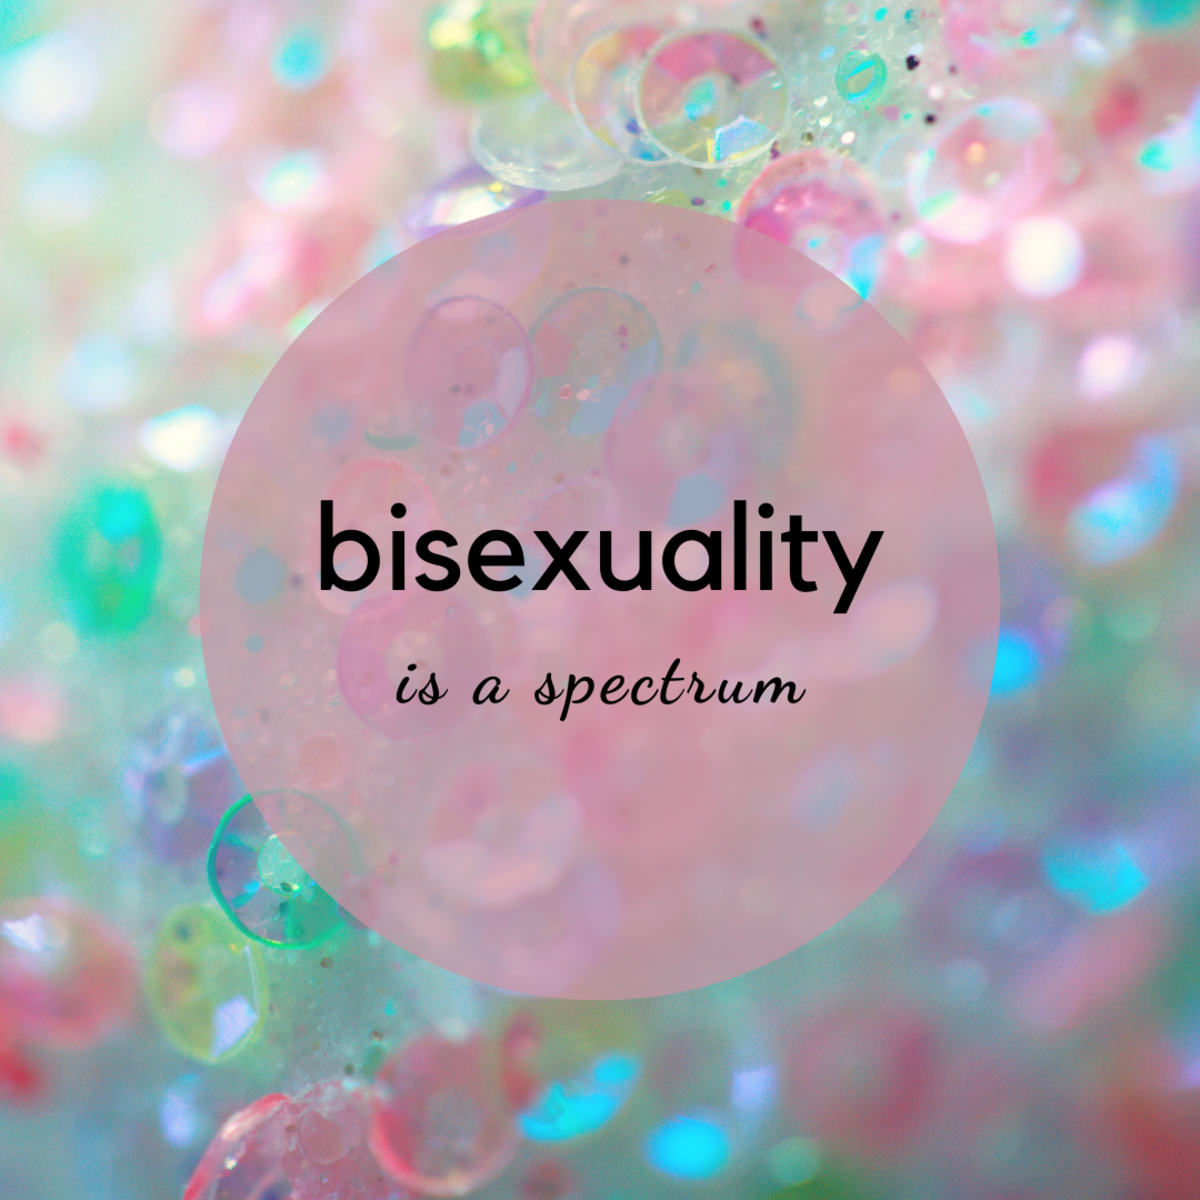 Individuals who identify within the bi spectrum may experience their attractions in very different ways. 